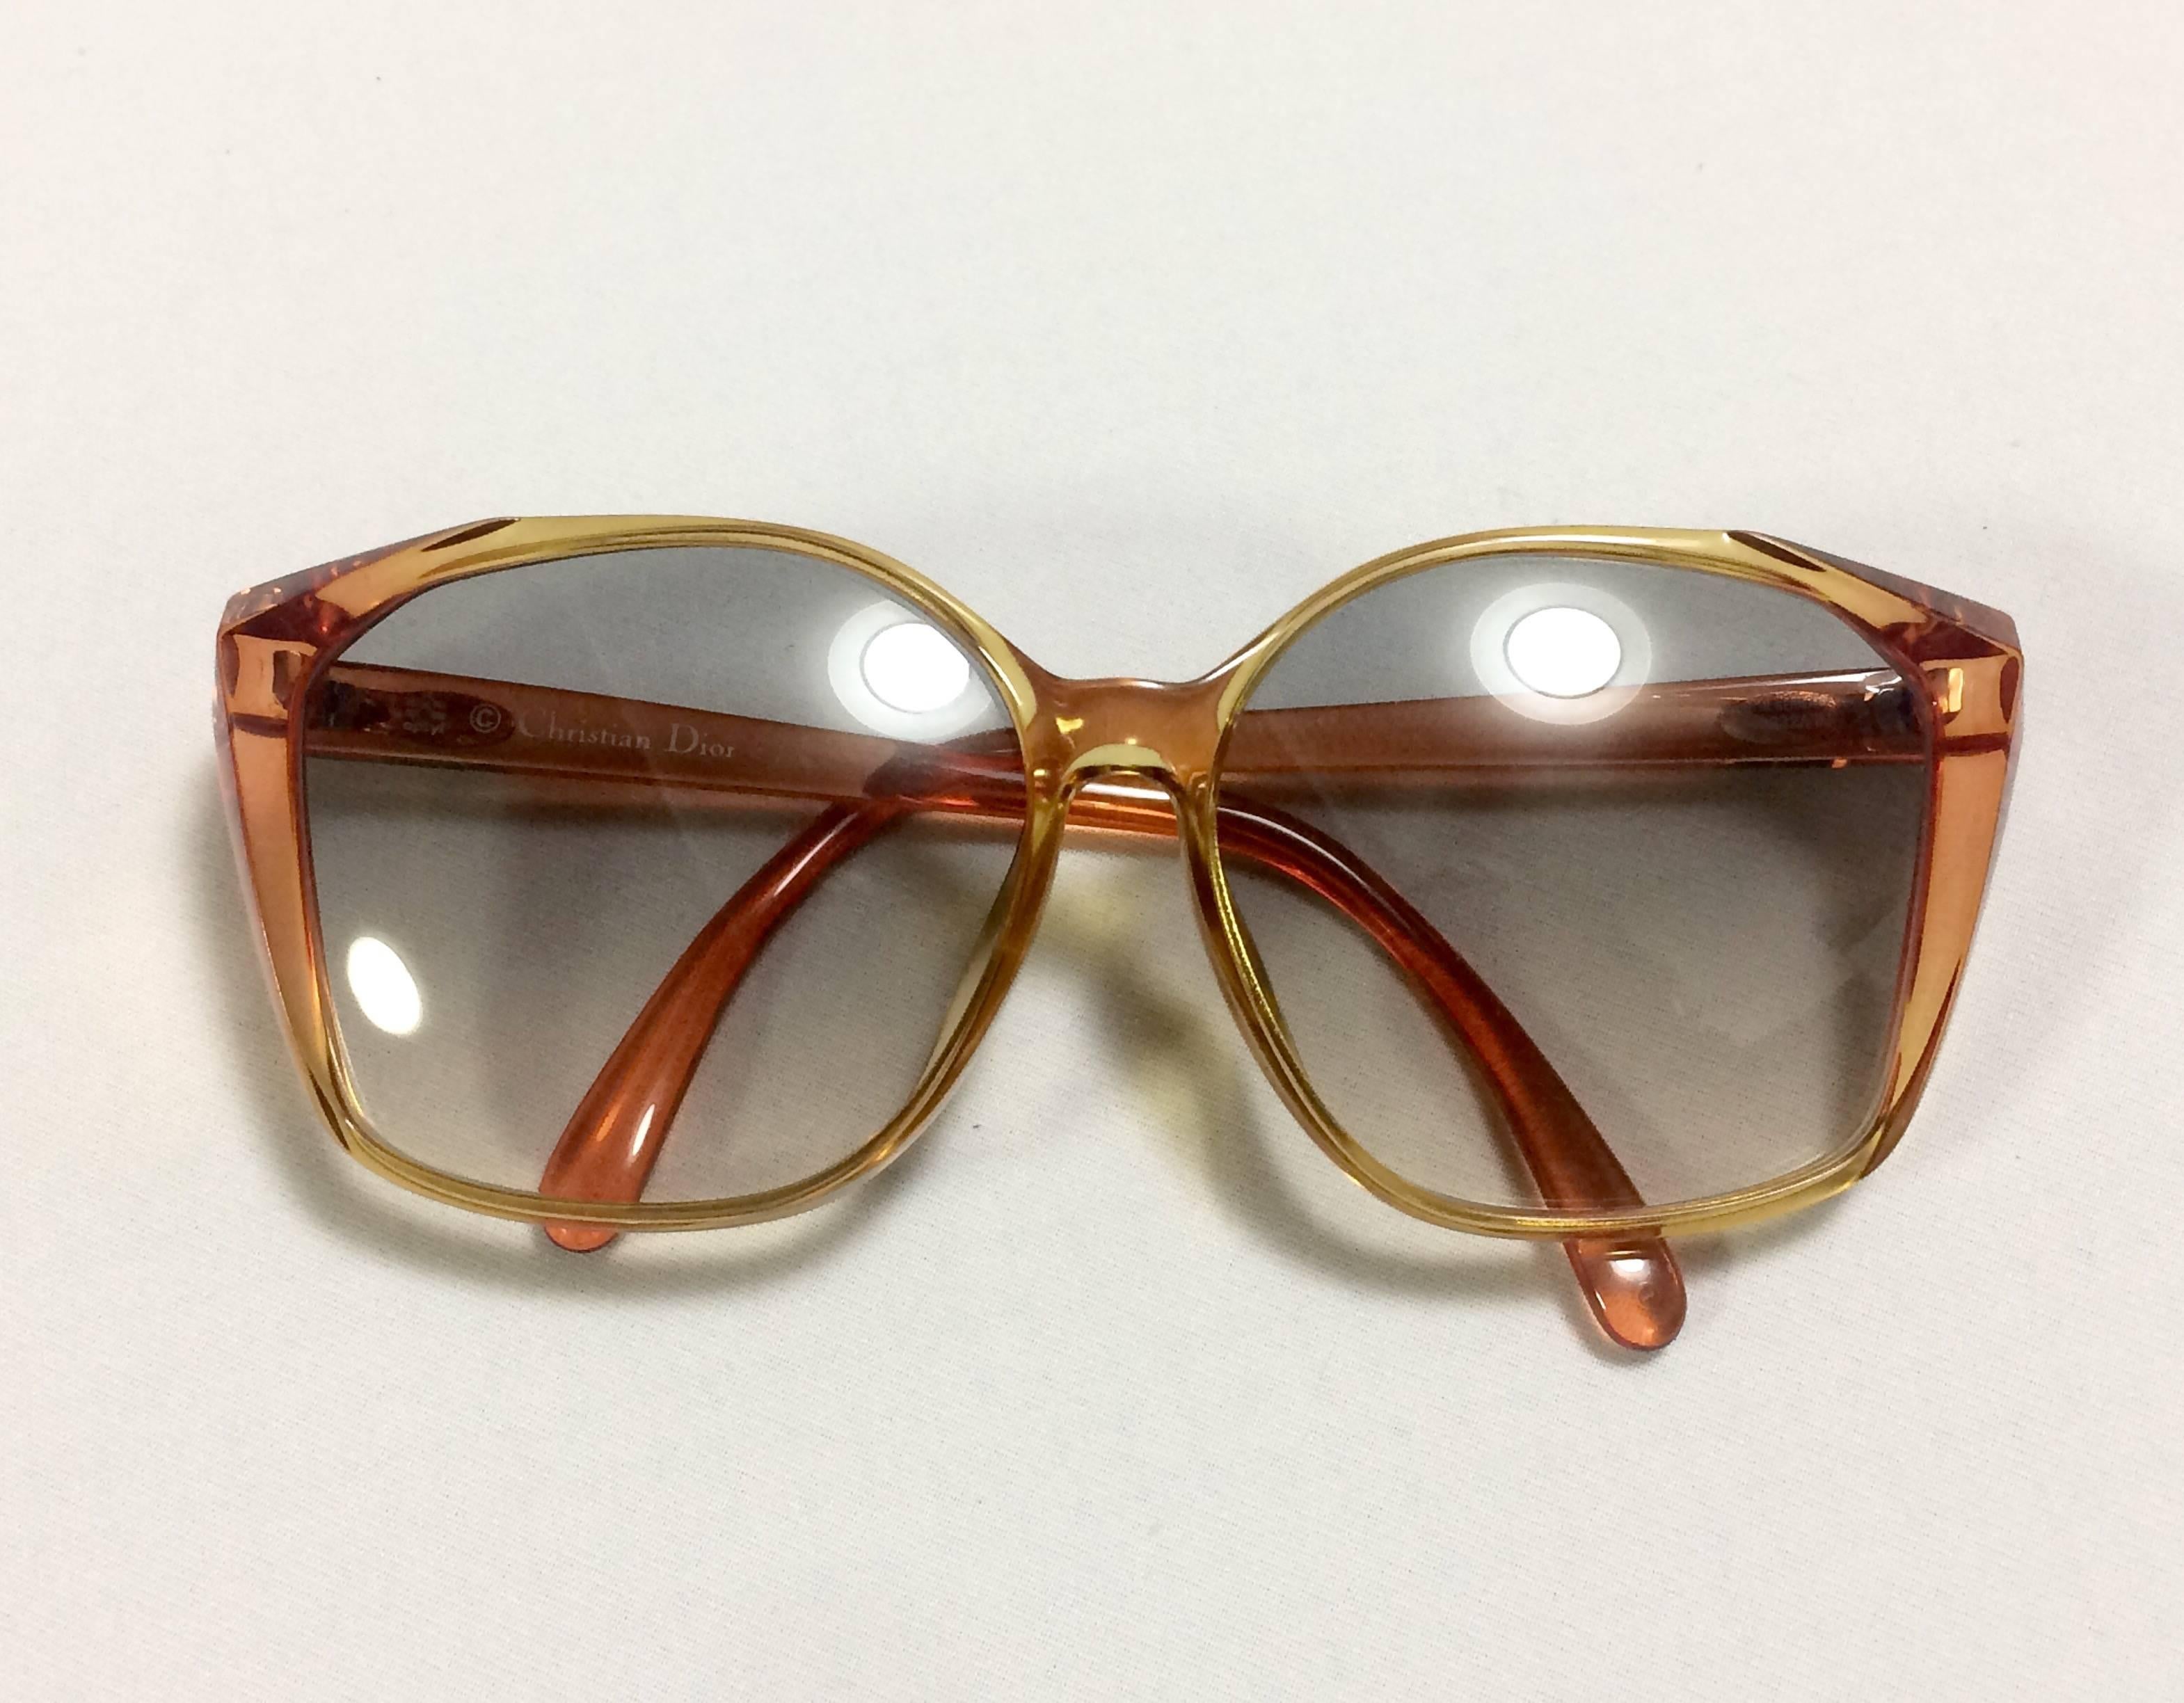 1960-1970s. vintage Christian Dior orange and yellow sunglasses. Very rare classic retro eyewear back in the old era. Authentic mod piece.

Retro and mod style are now back in trend again! 
This is a vintage Christian Dior orange and yellow